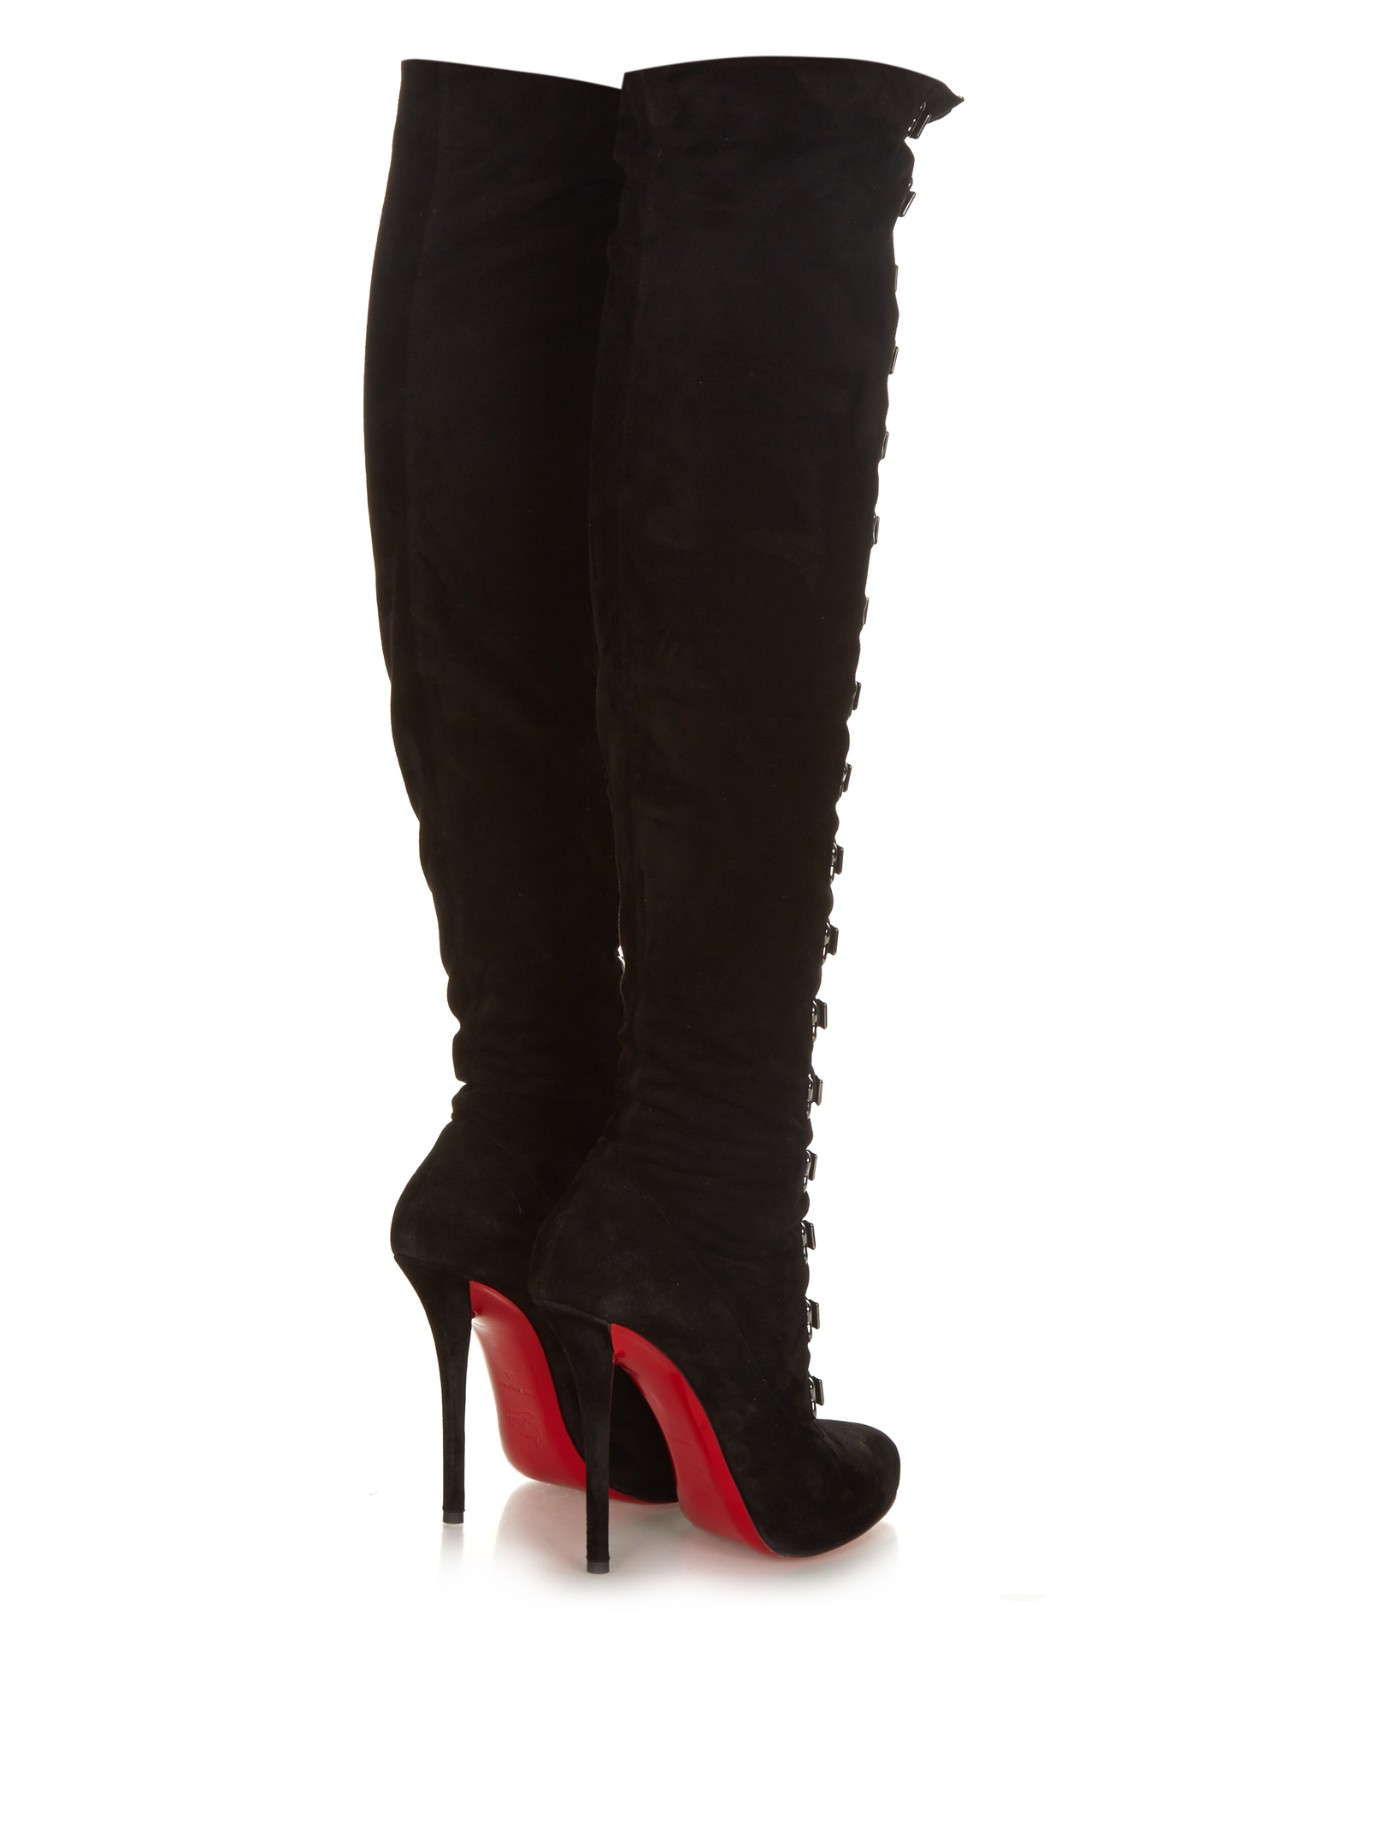 Louboutin Top Croche Suede Over-The-Knee Boots in Lyst